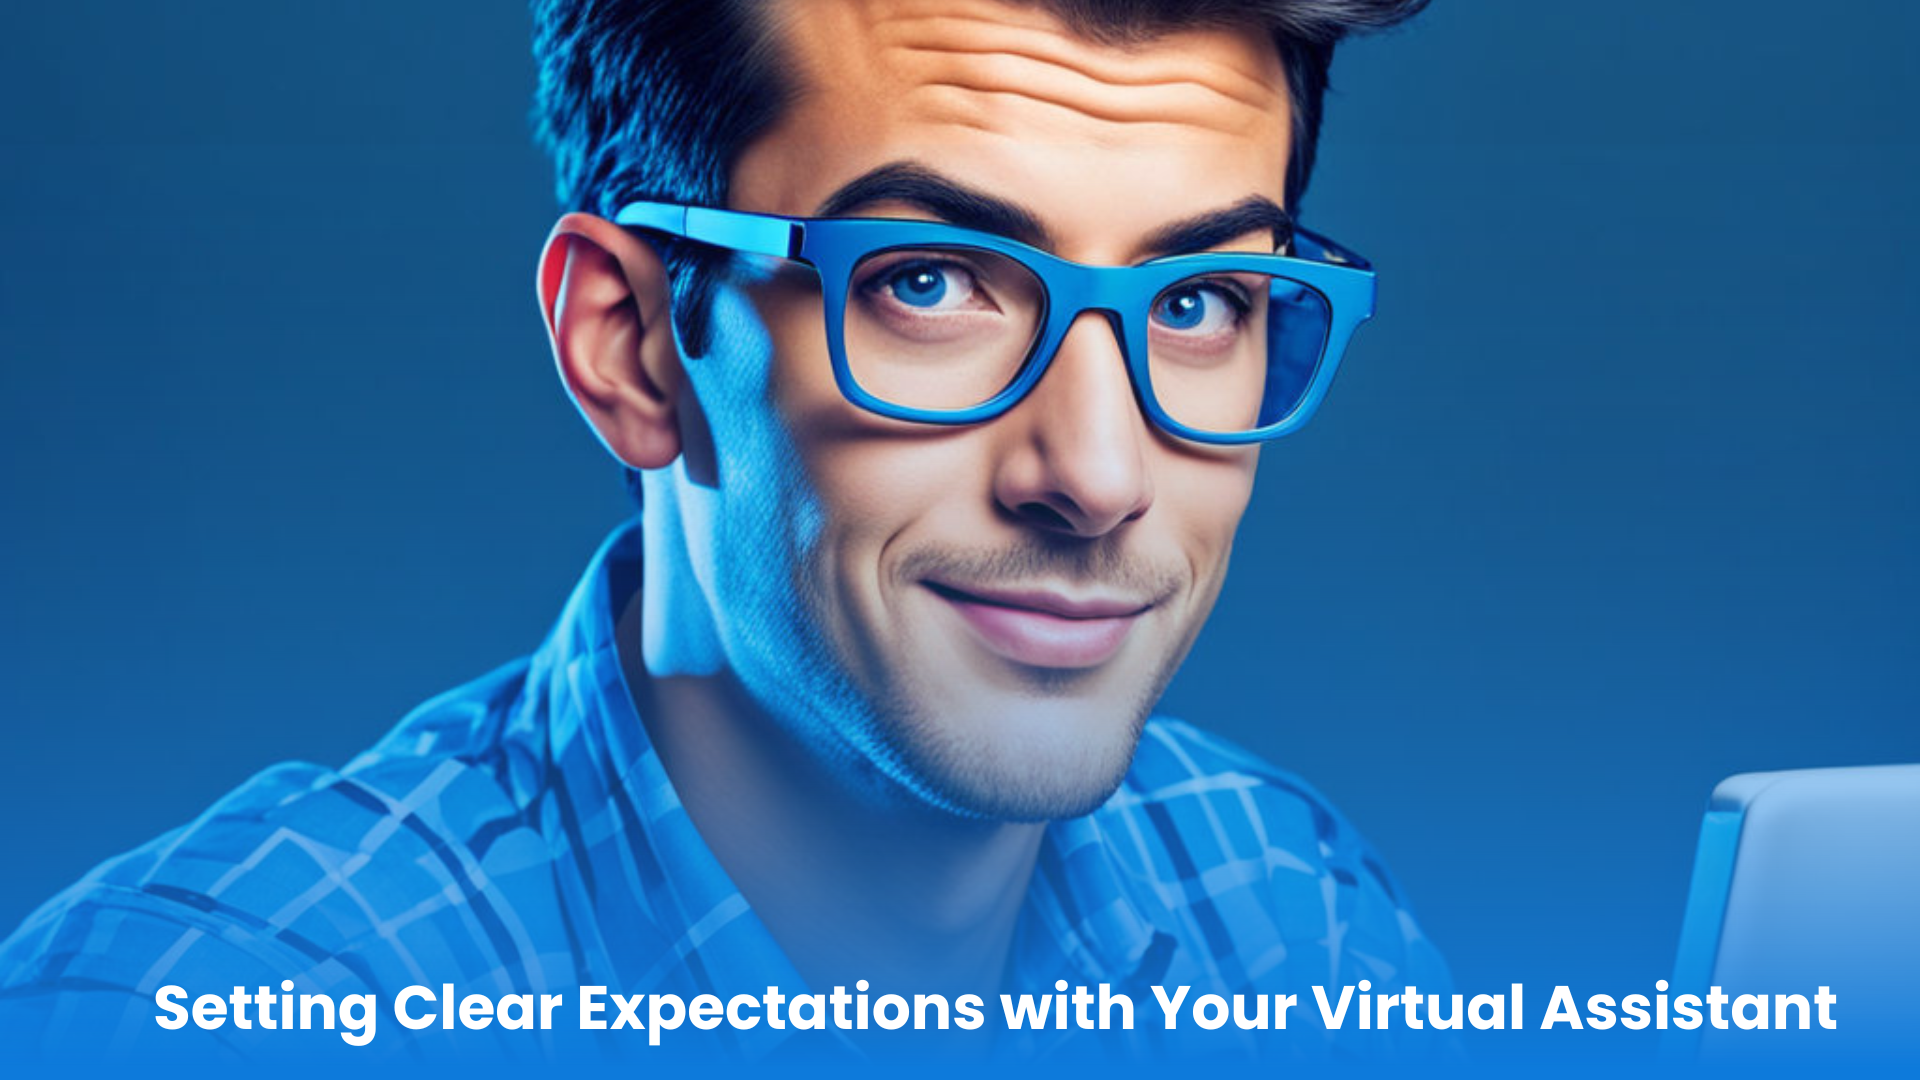 A confident young man wearing blue glasses and working on a computer, with a caption about managing a virtual assistant through clear expectations.